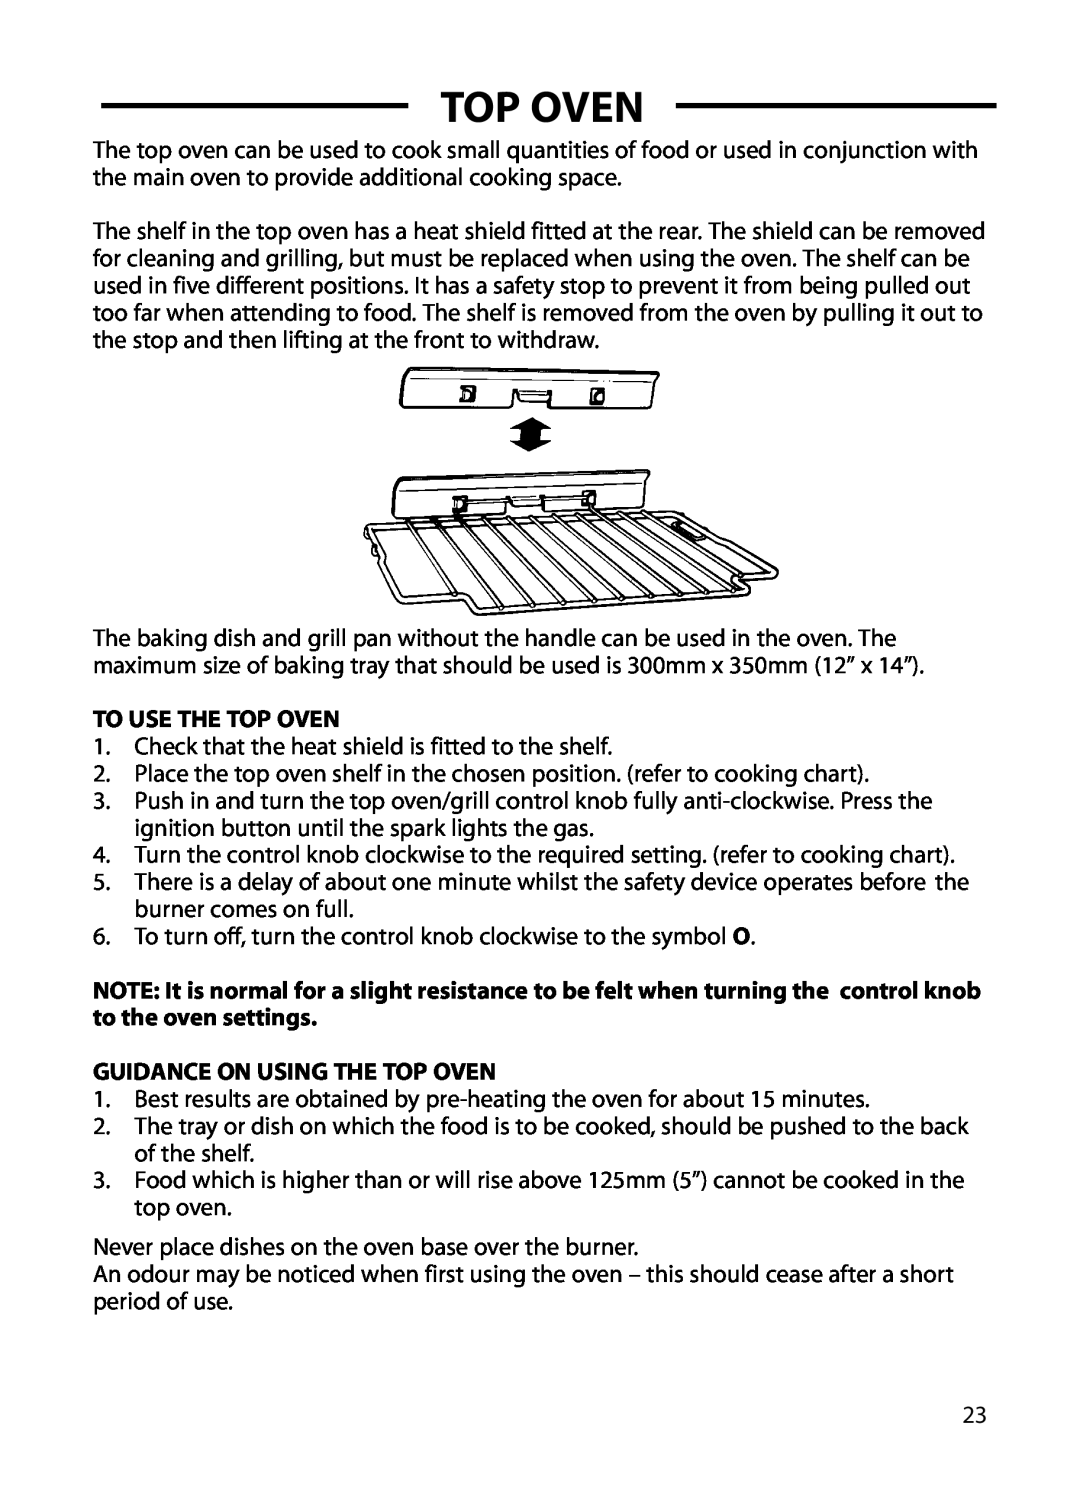 Hotpoint 6 DOG, GW66, GW54, GW62 manual To Use The Top Oven, Guidance On Using The Top Oven 